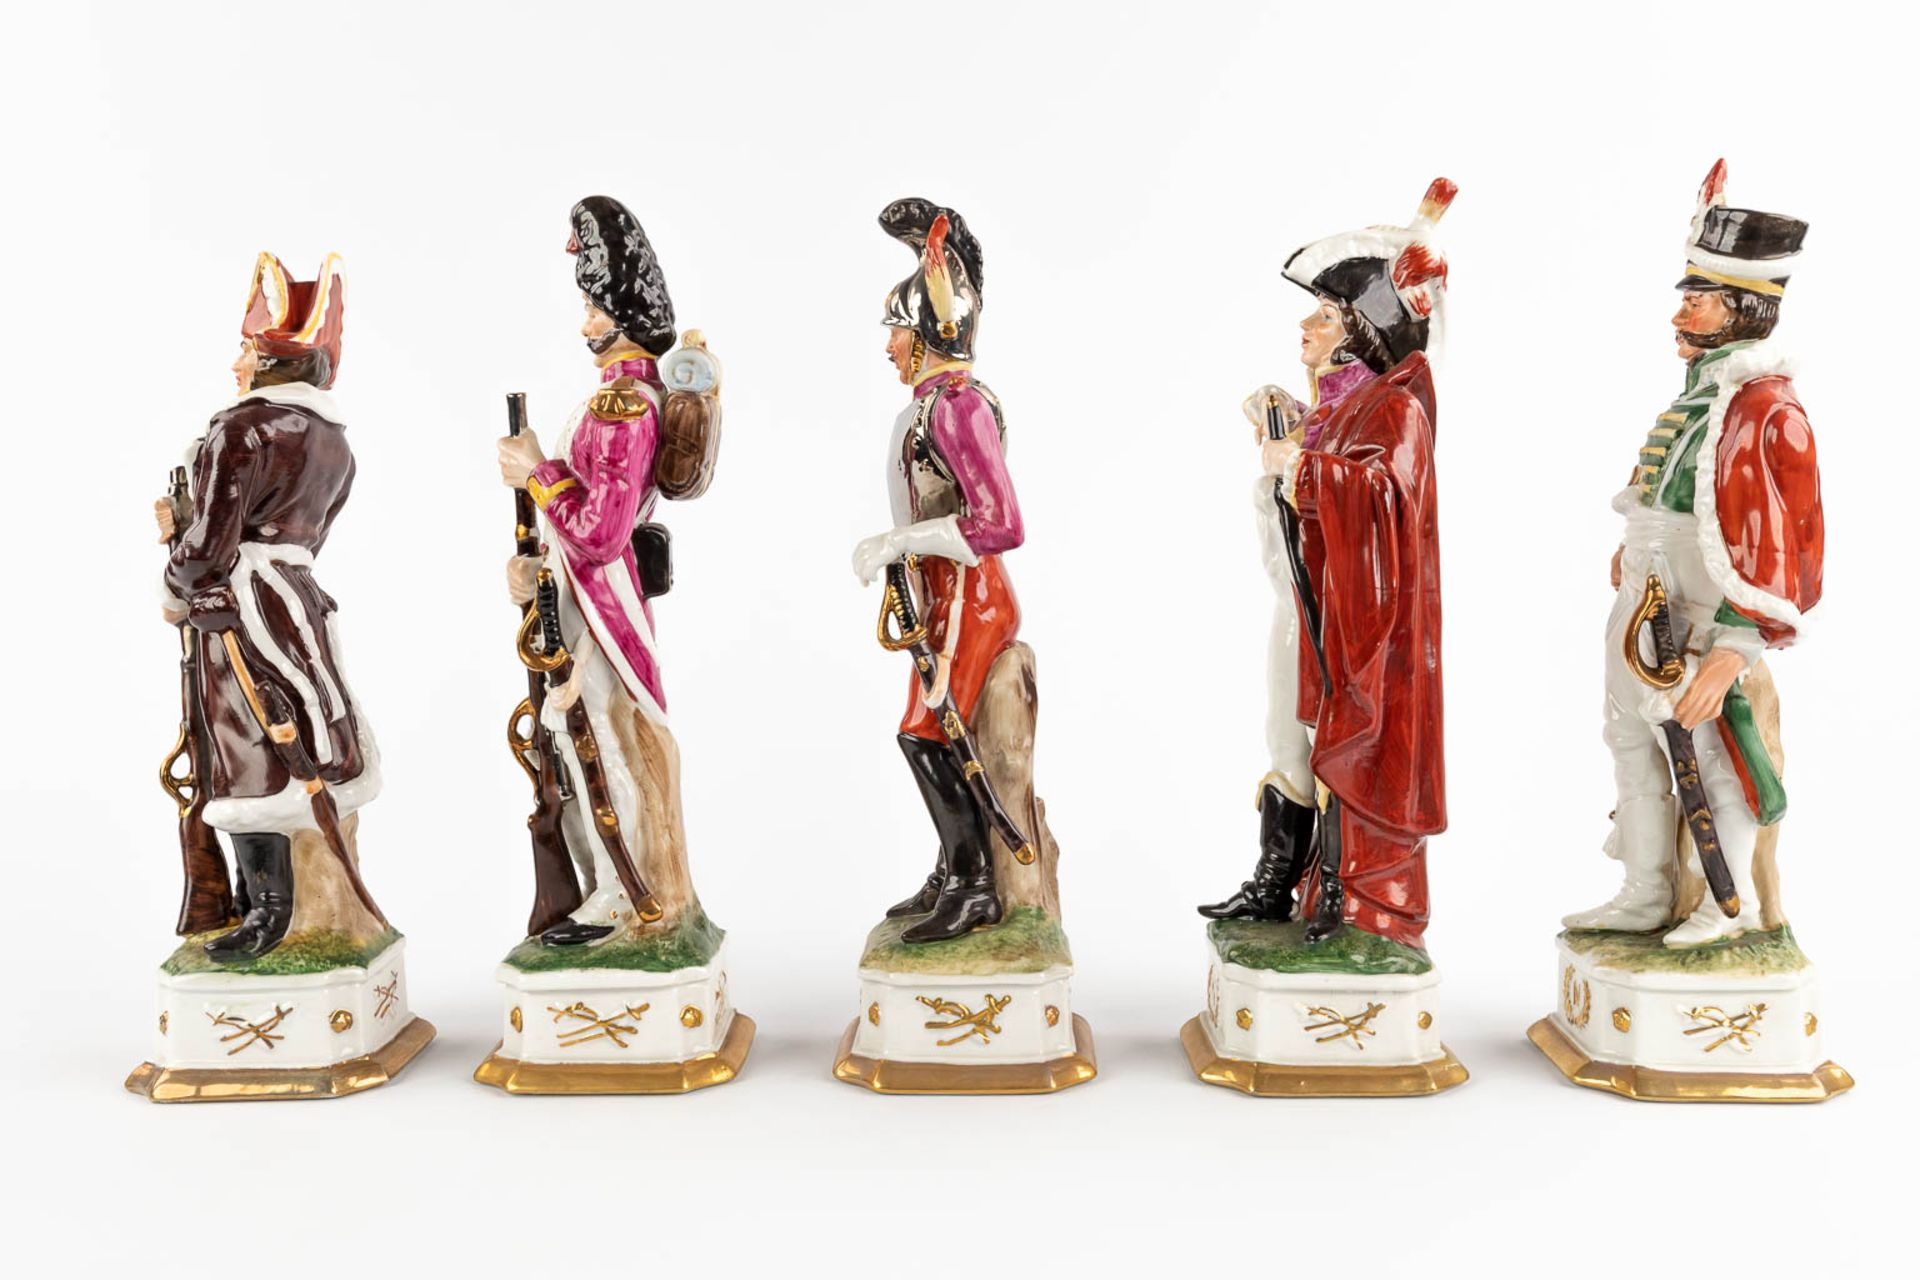 Napoleon and 9 generals, polychrome porcelain. 20th C. (H:32 cm) - Image 9 of 15